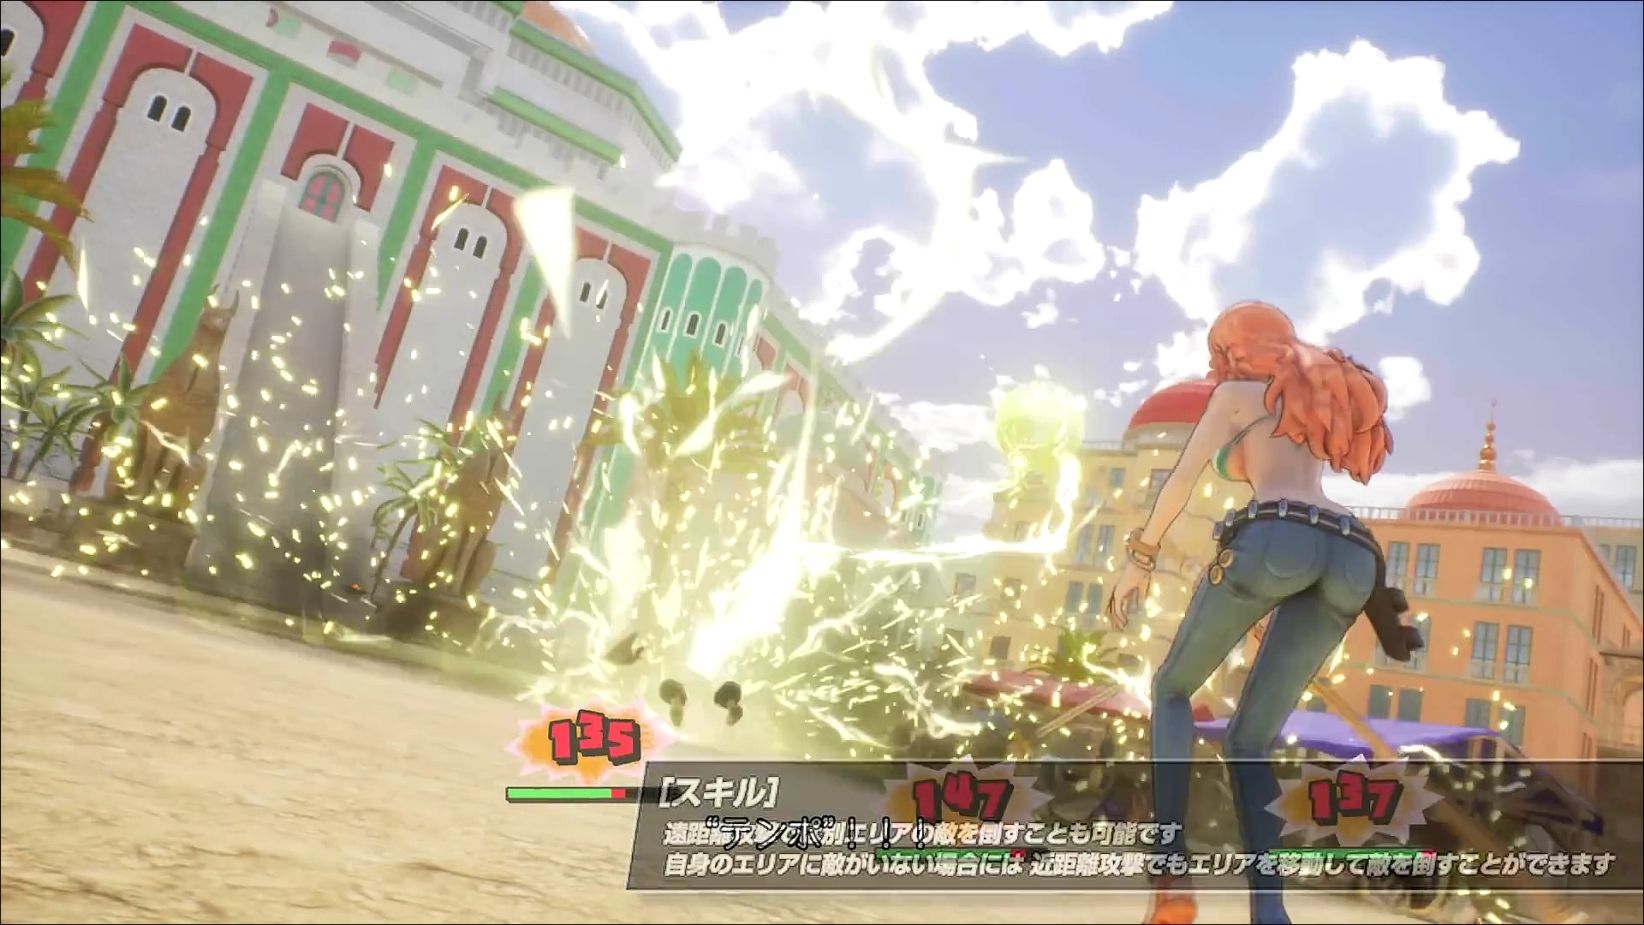 【Image】New "One Piece Odyssey", Nami and Robin 3D model is too erotic 2